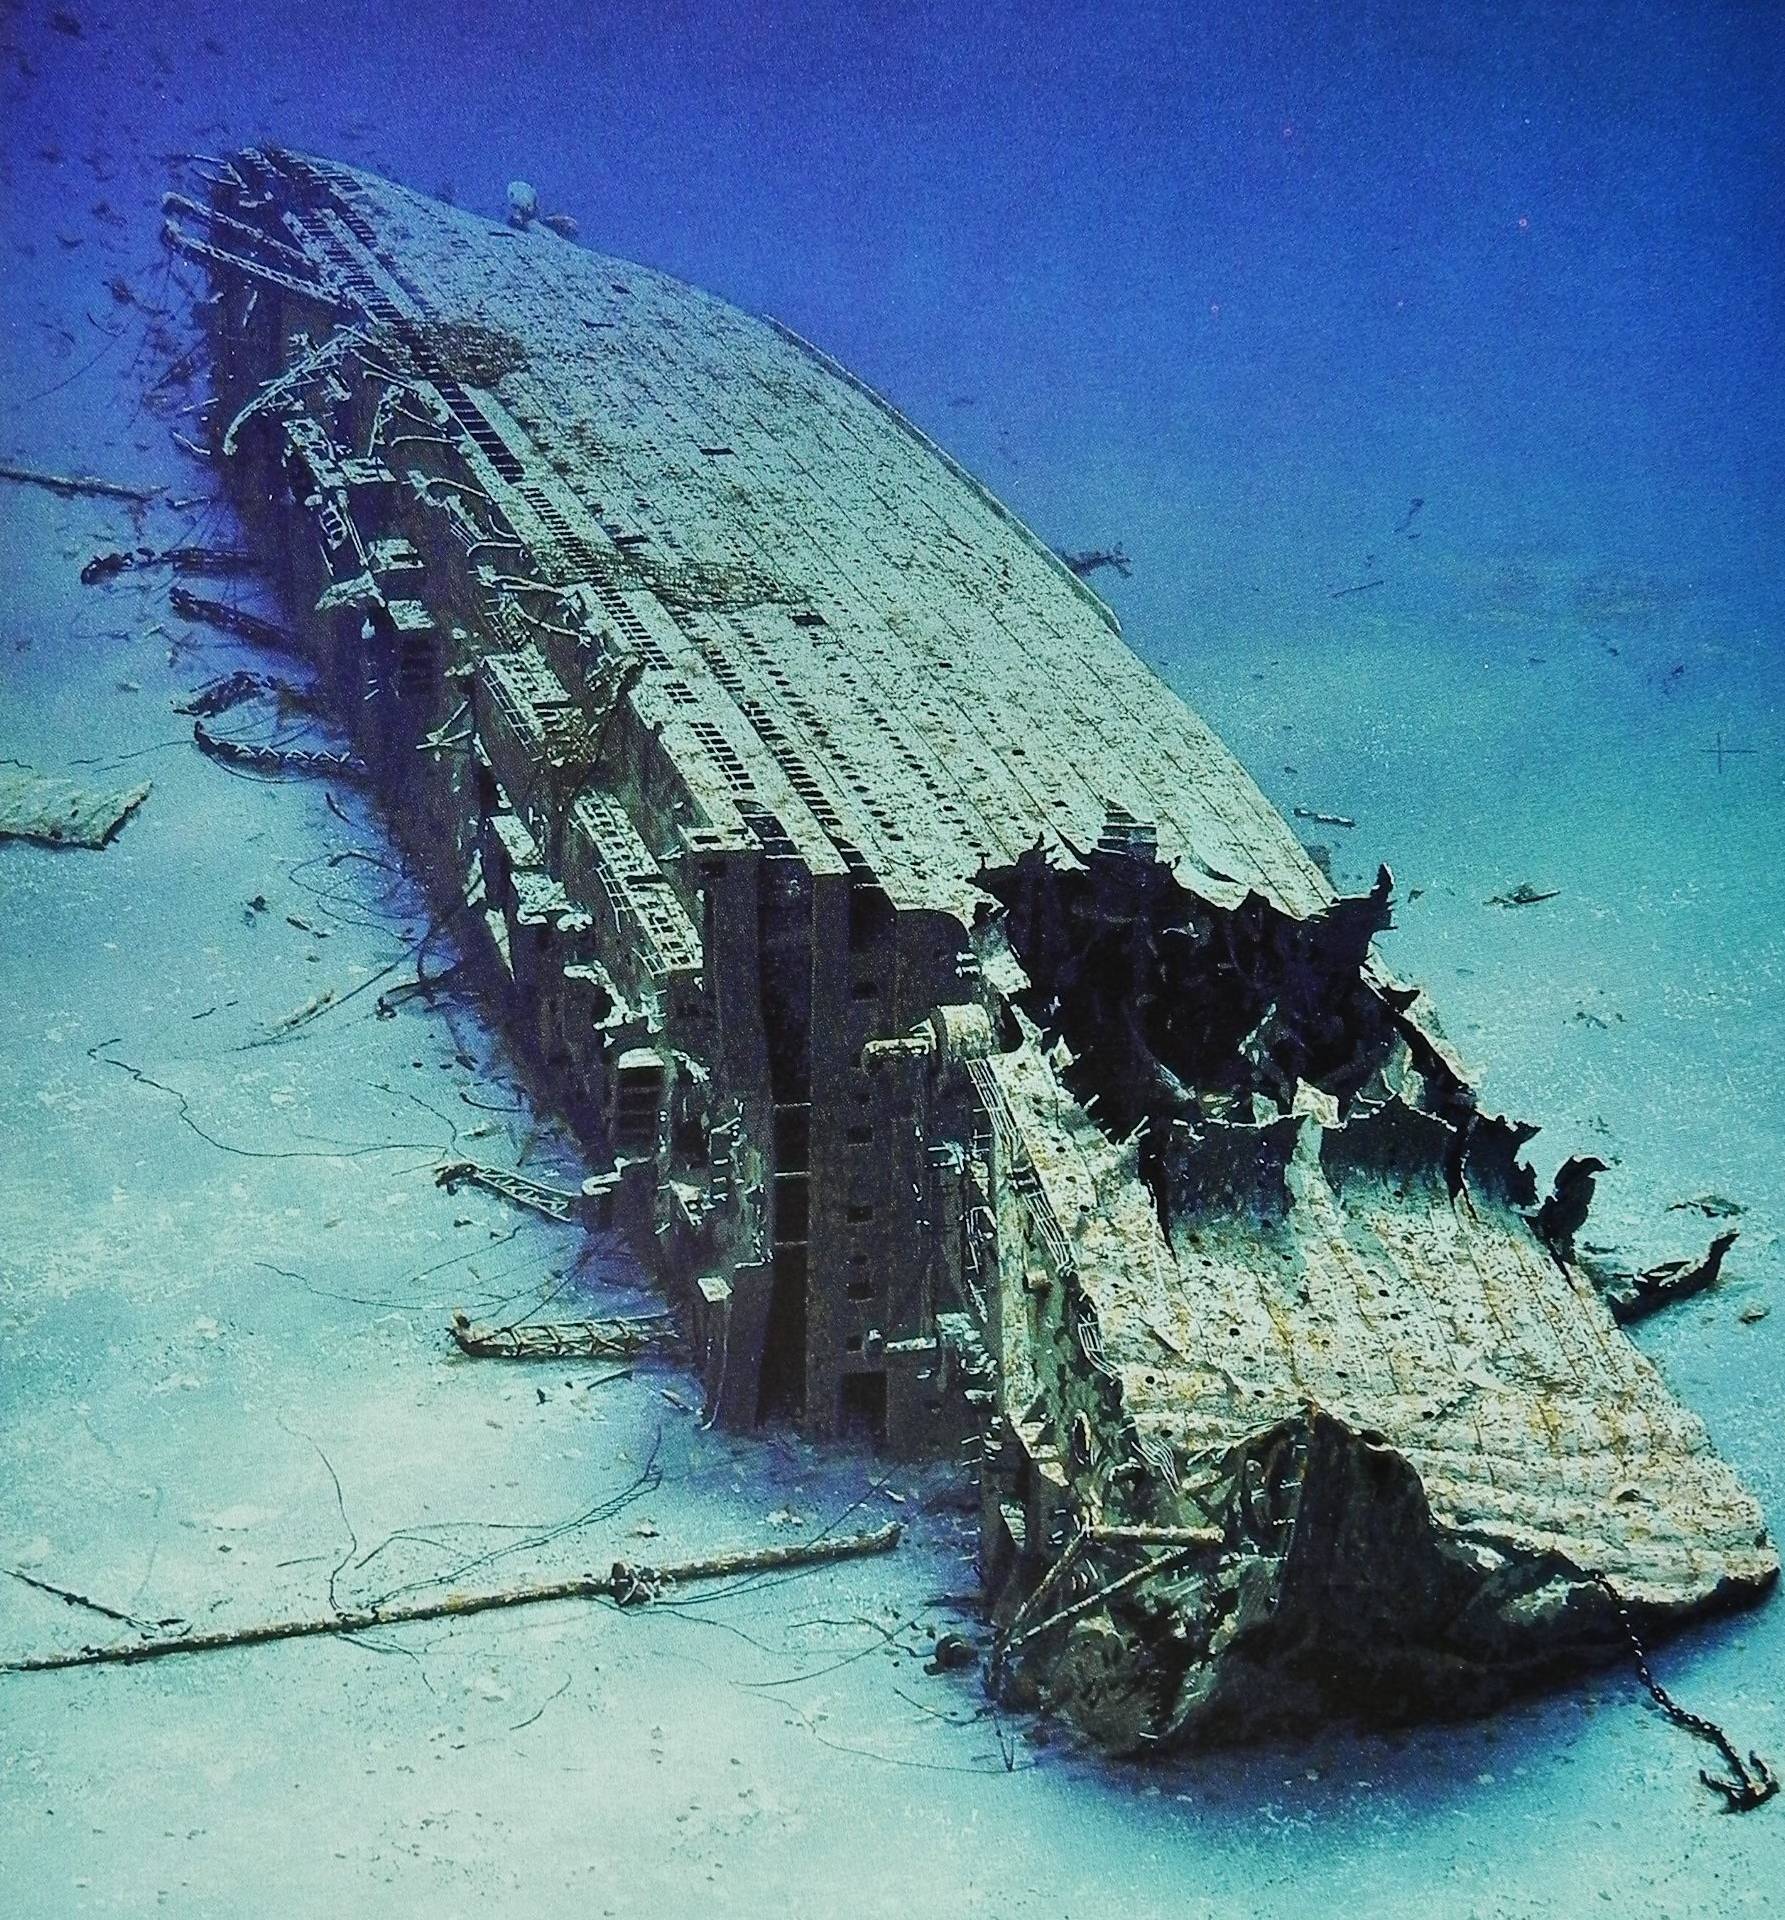 Wreckage site of the Britannic, the sister ship to the Titanic